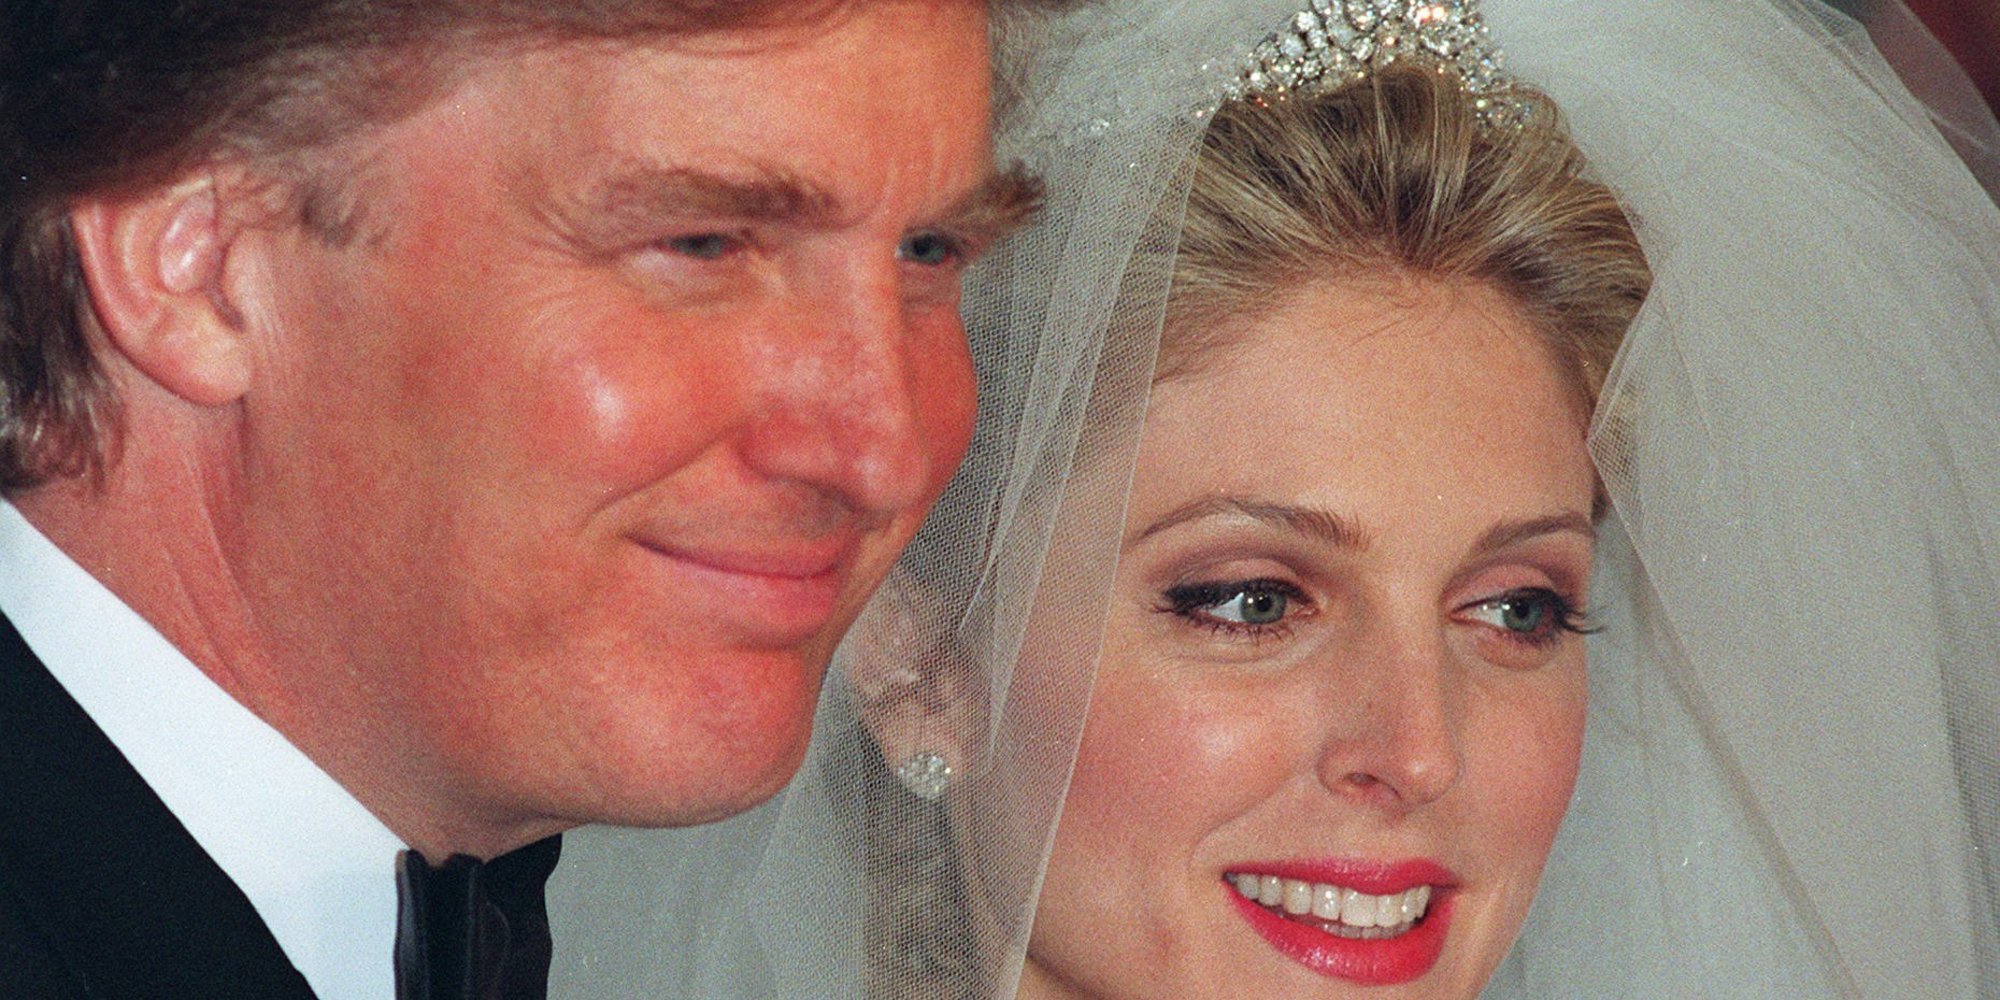 FILE--Donald Trump and Marla Maples pose for photographers following their wedding ceremony in New York, as seen in this December 1993 file photo. Trump and Maples, his wife of three years, are on the verge of breaking up, the New York Post reported Friday, May 2, 1997. ``Donald wants out. He's looking for his freedom,'' the newspaper said, quoting unidentified sources. (AP Photo/Kathy Willens, File)